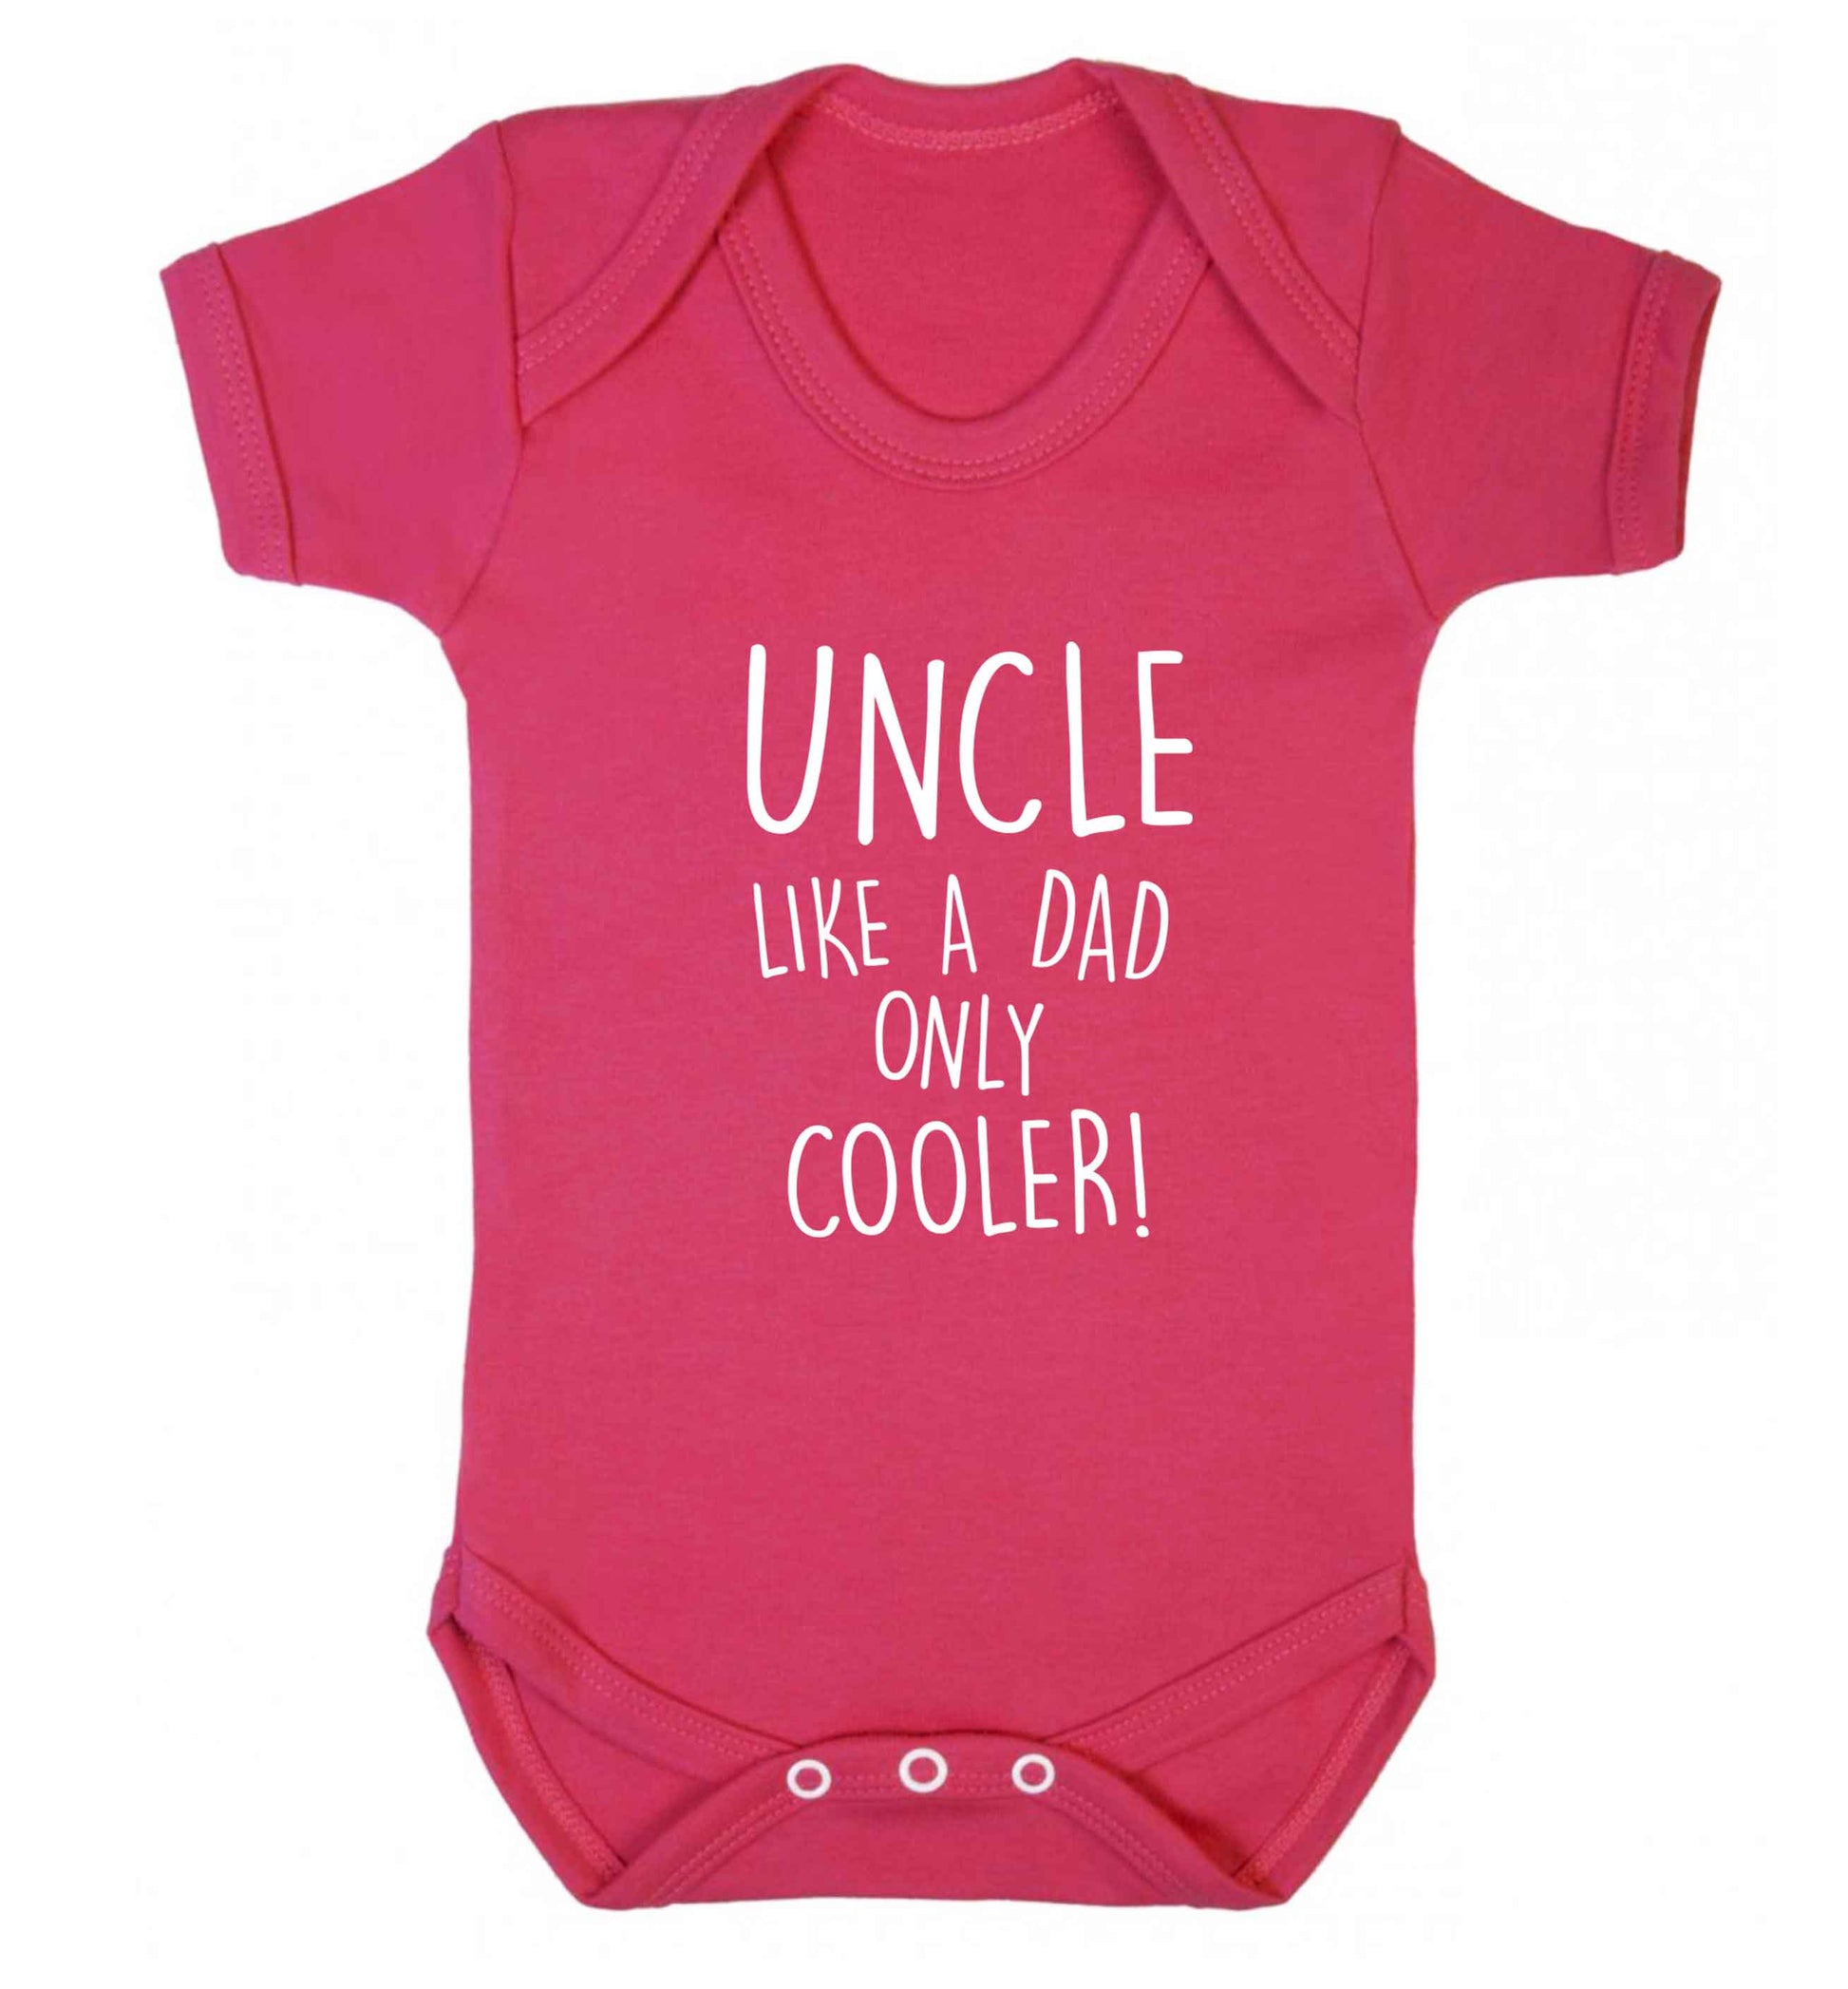 Uncle like a dad only cooler baby vest dark pink 18-24 months